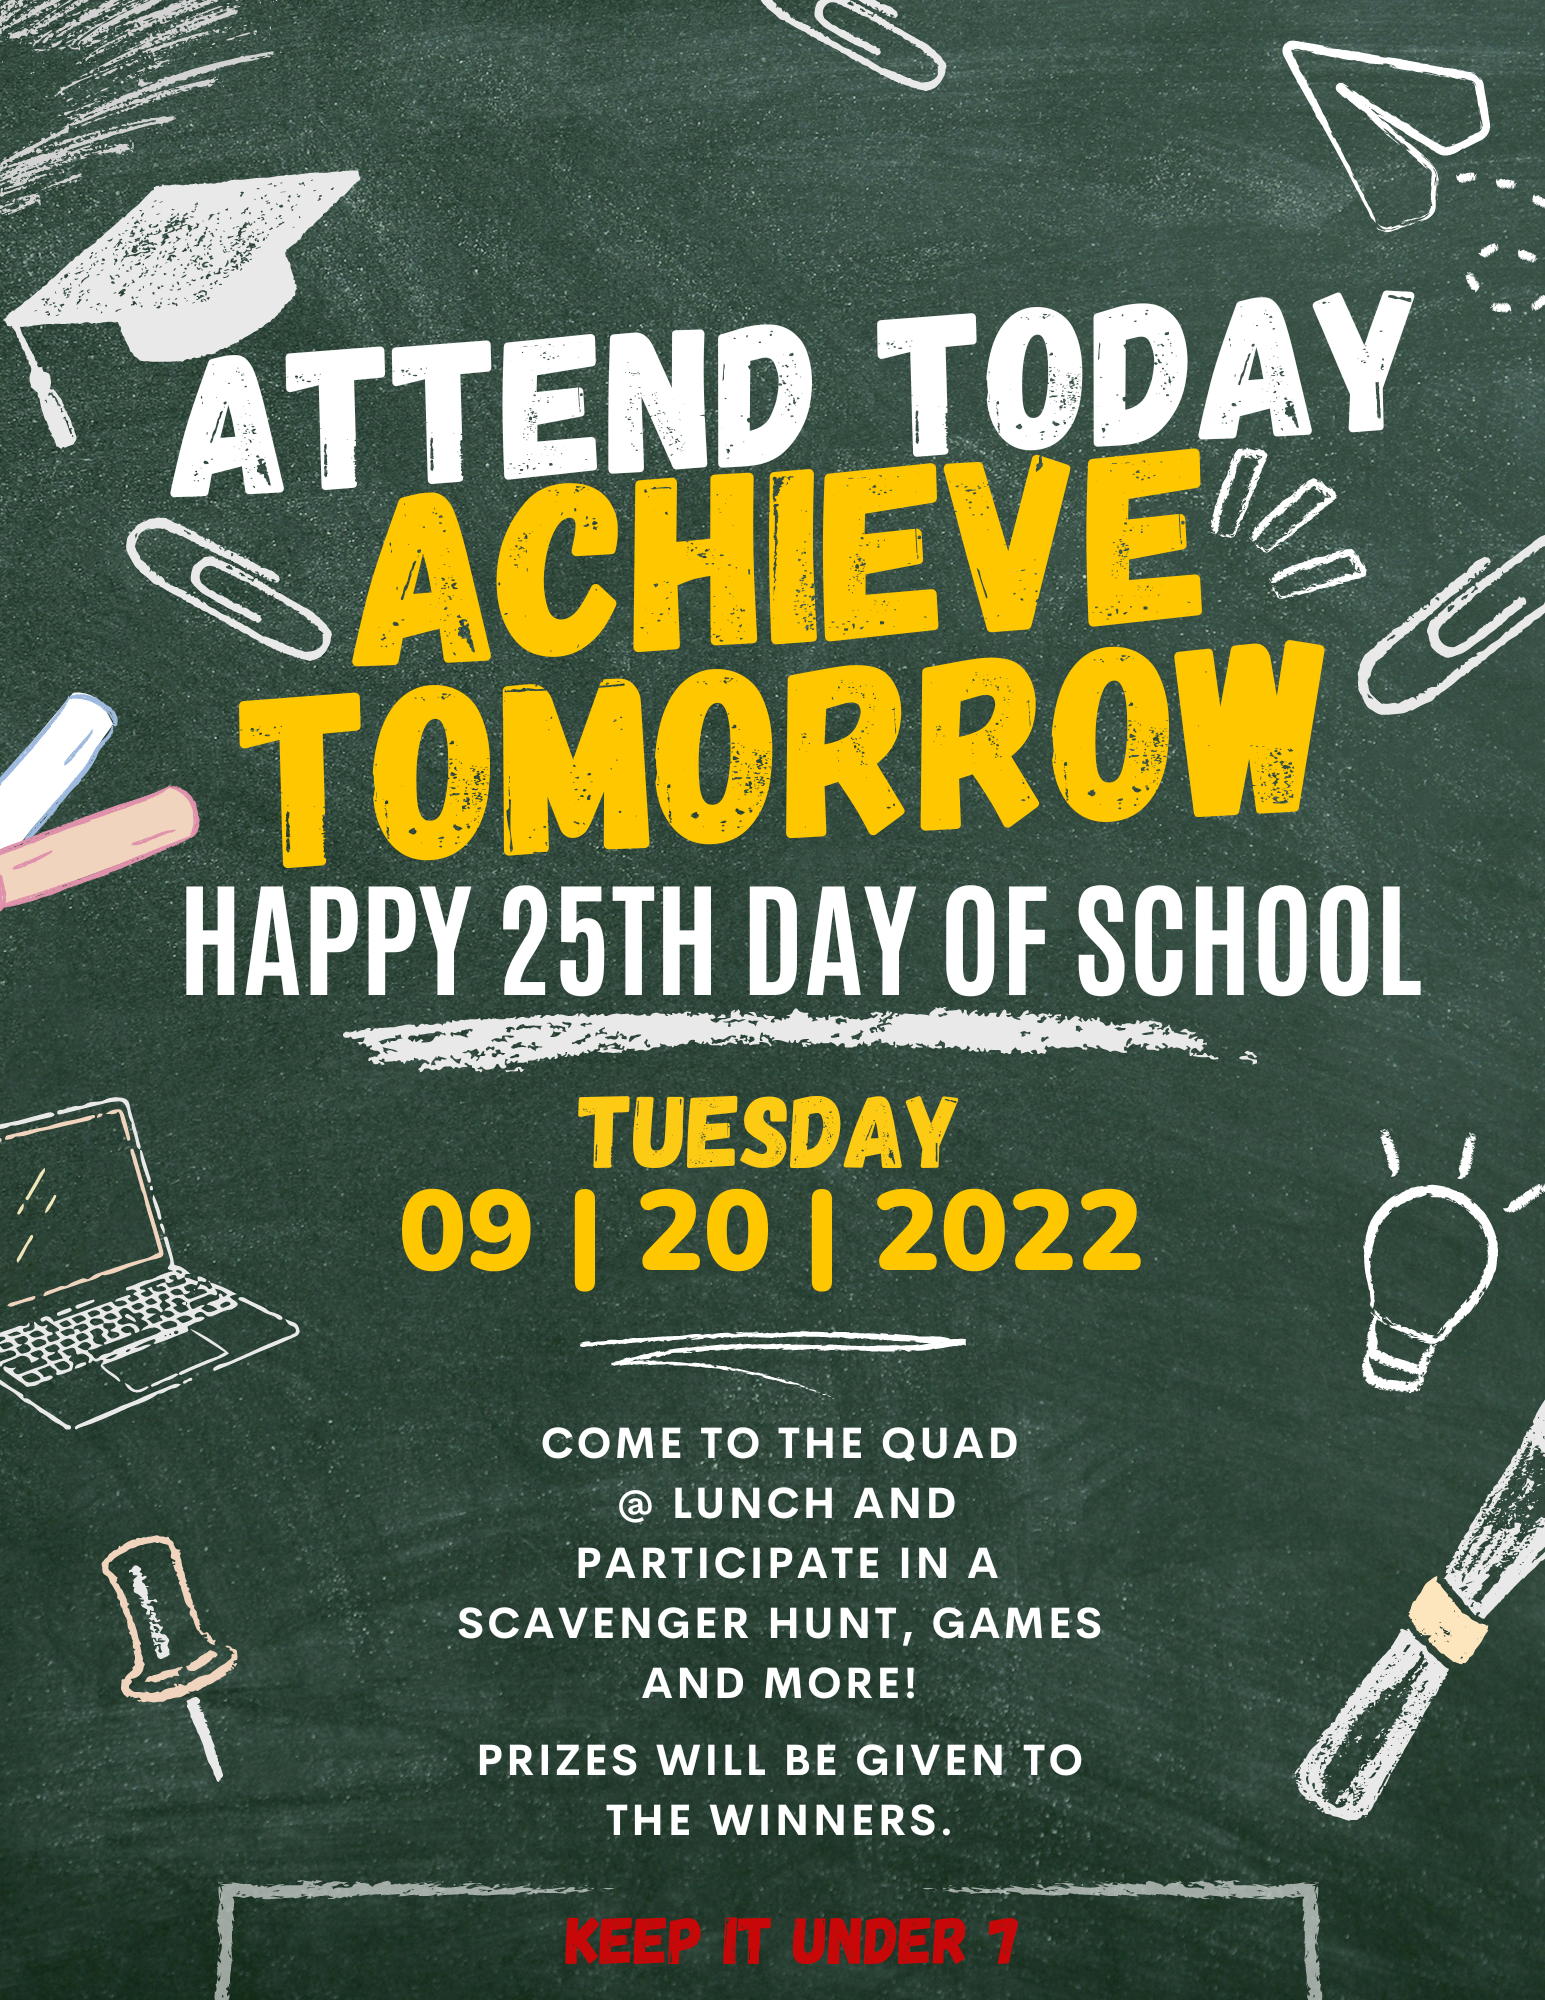 Happy 25th day of school!!!!! Keep it under 7 HPIAMERs. Attendance matters. 